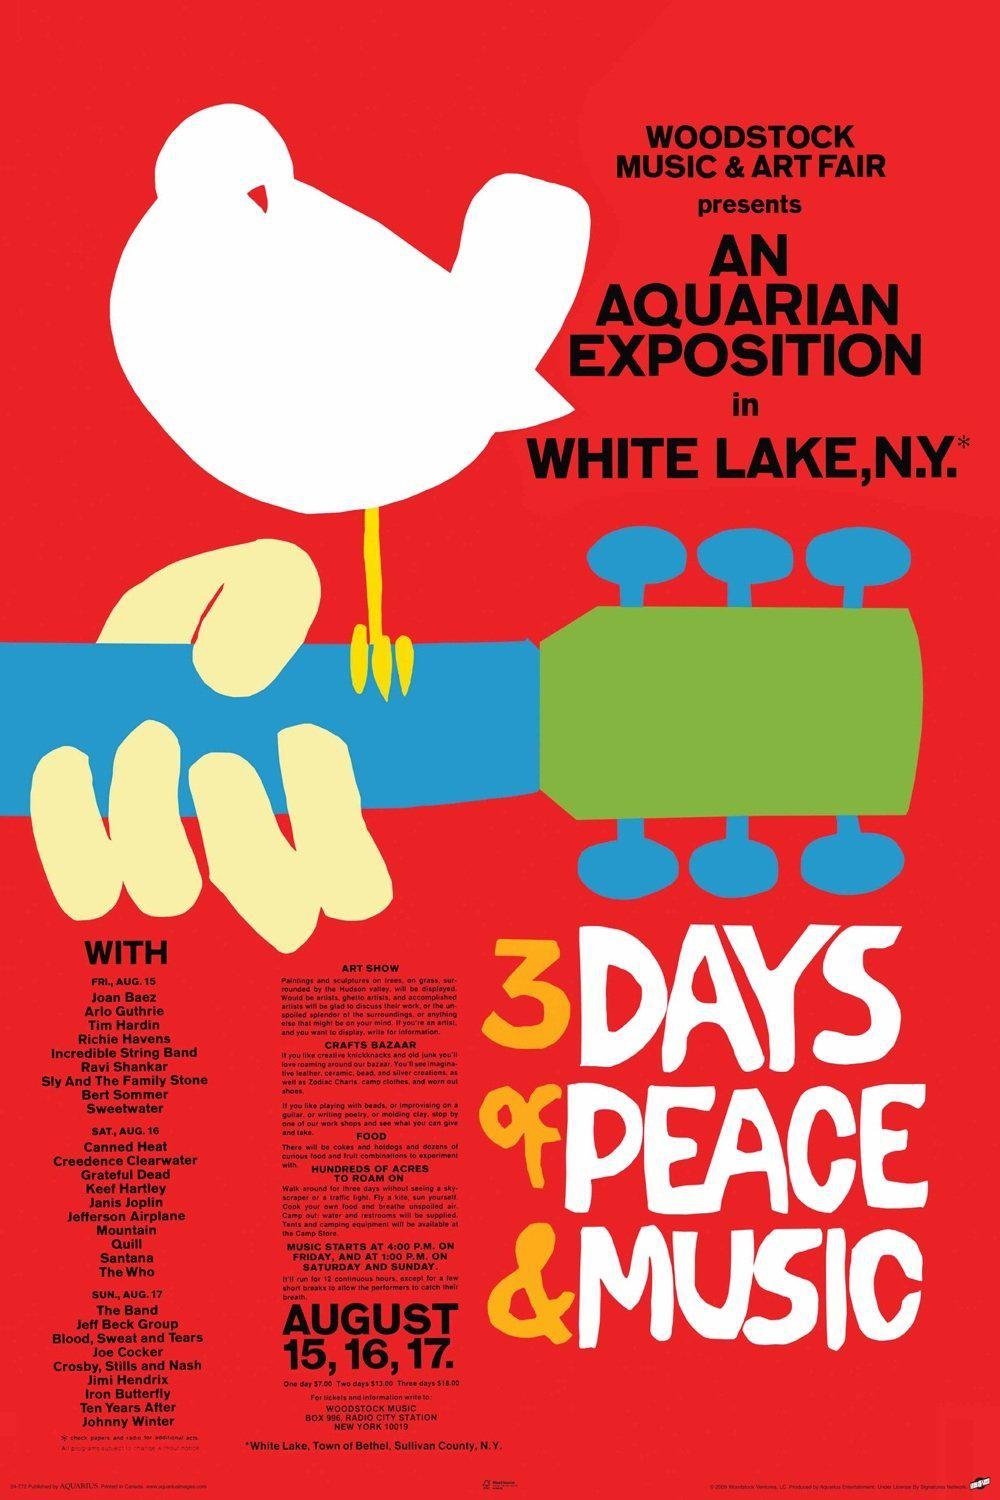 The History Of The Woodstock Festival - Part 4